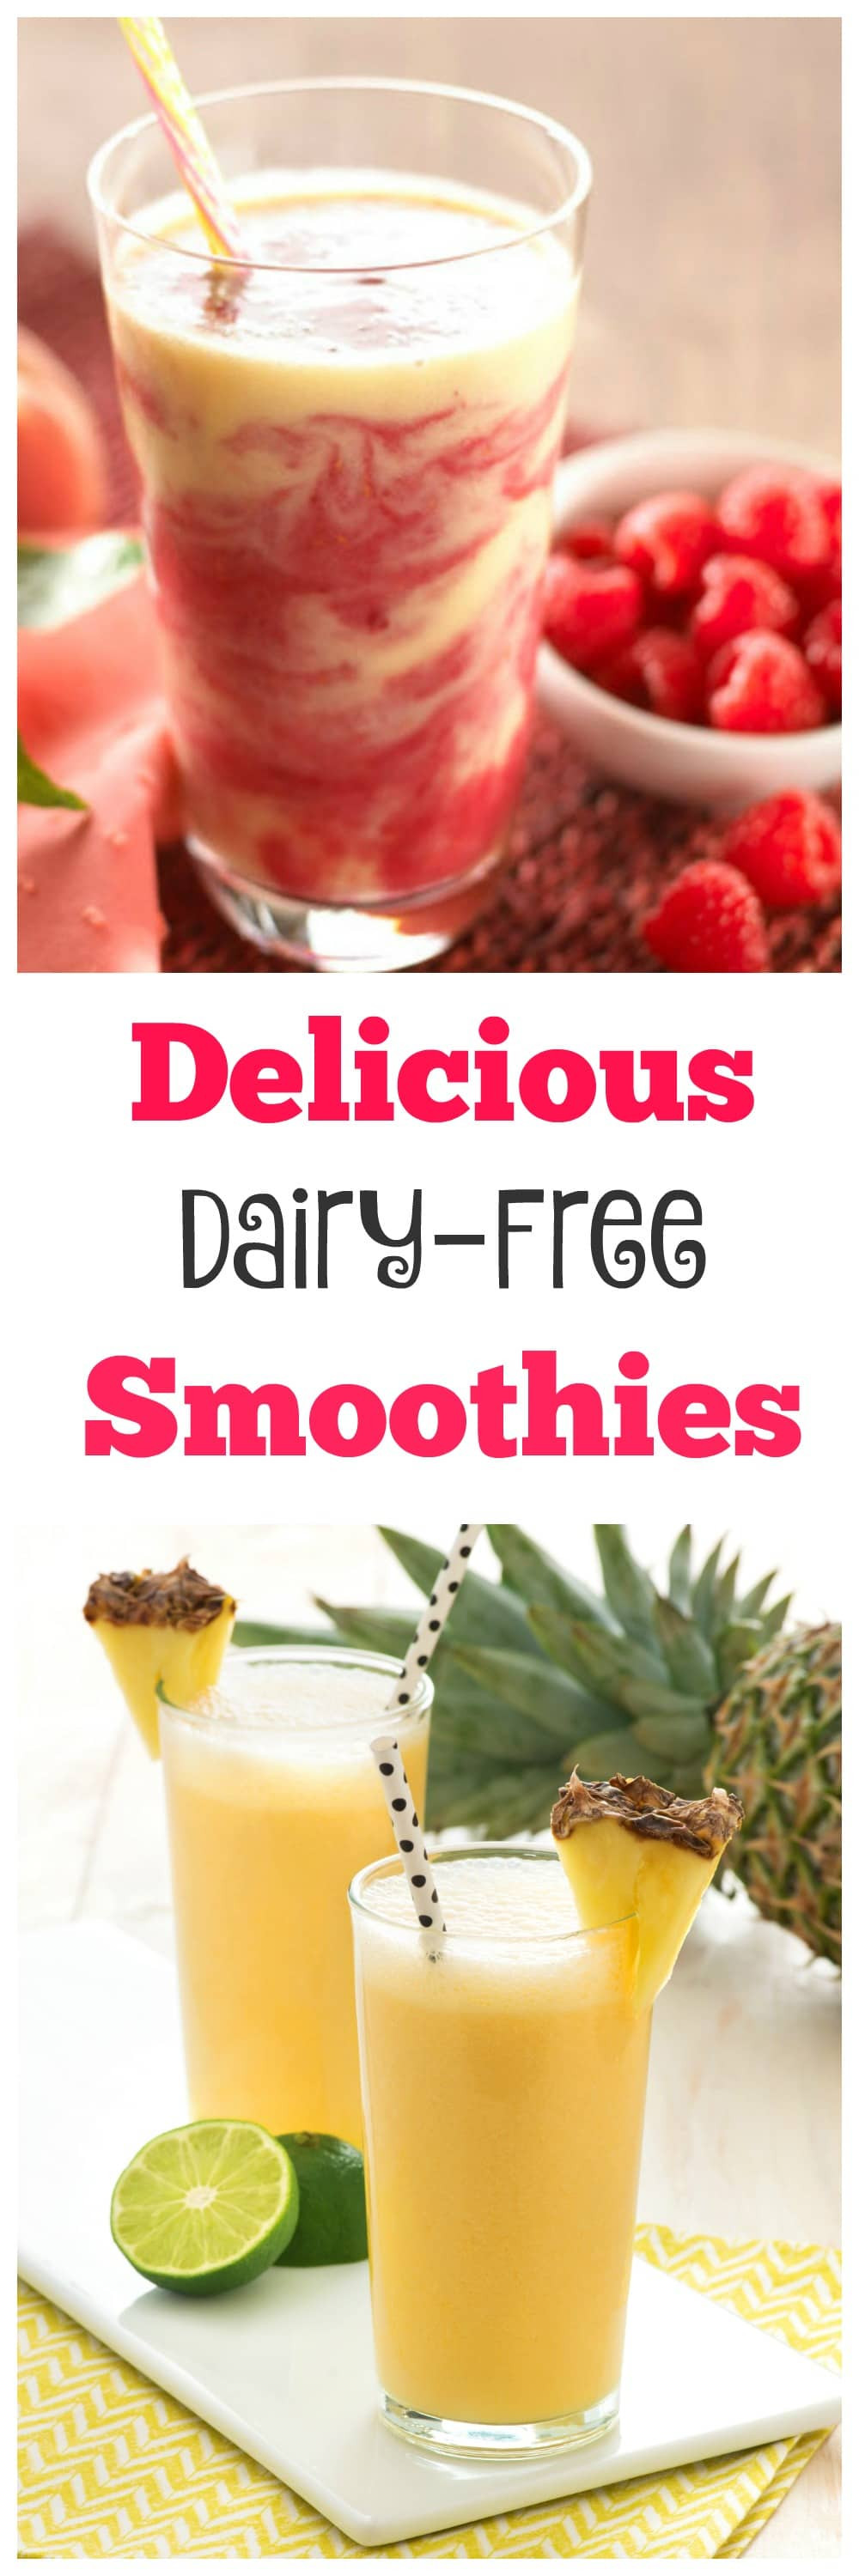 Dairy Free Smoothies
 Delicious Dairy Free Smoothies